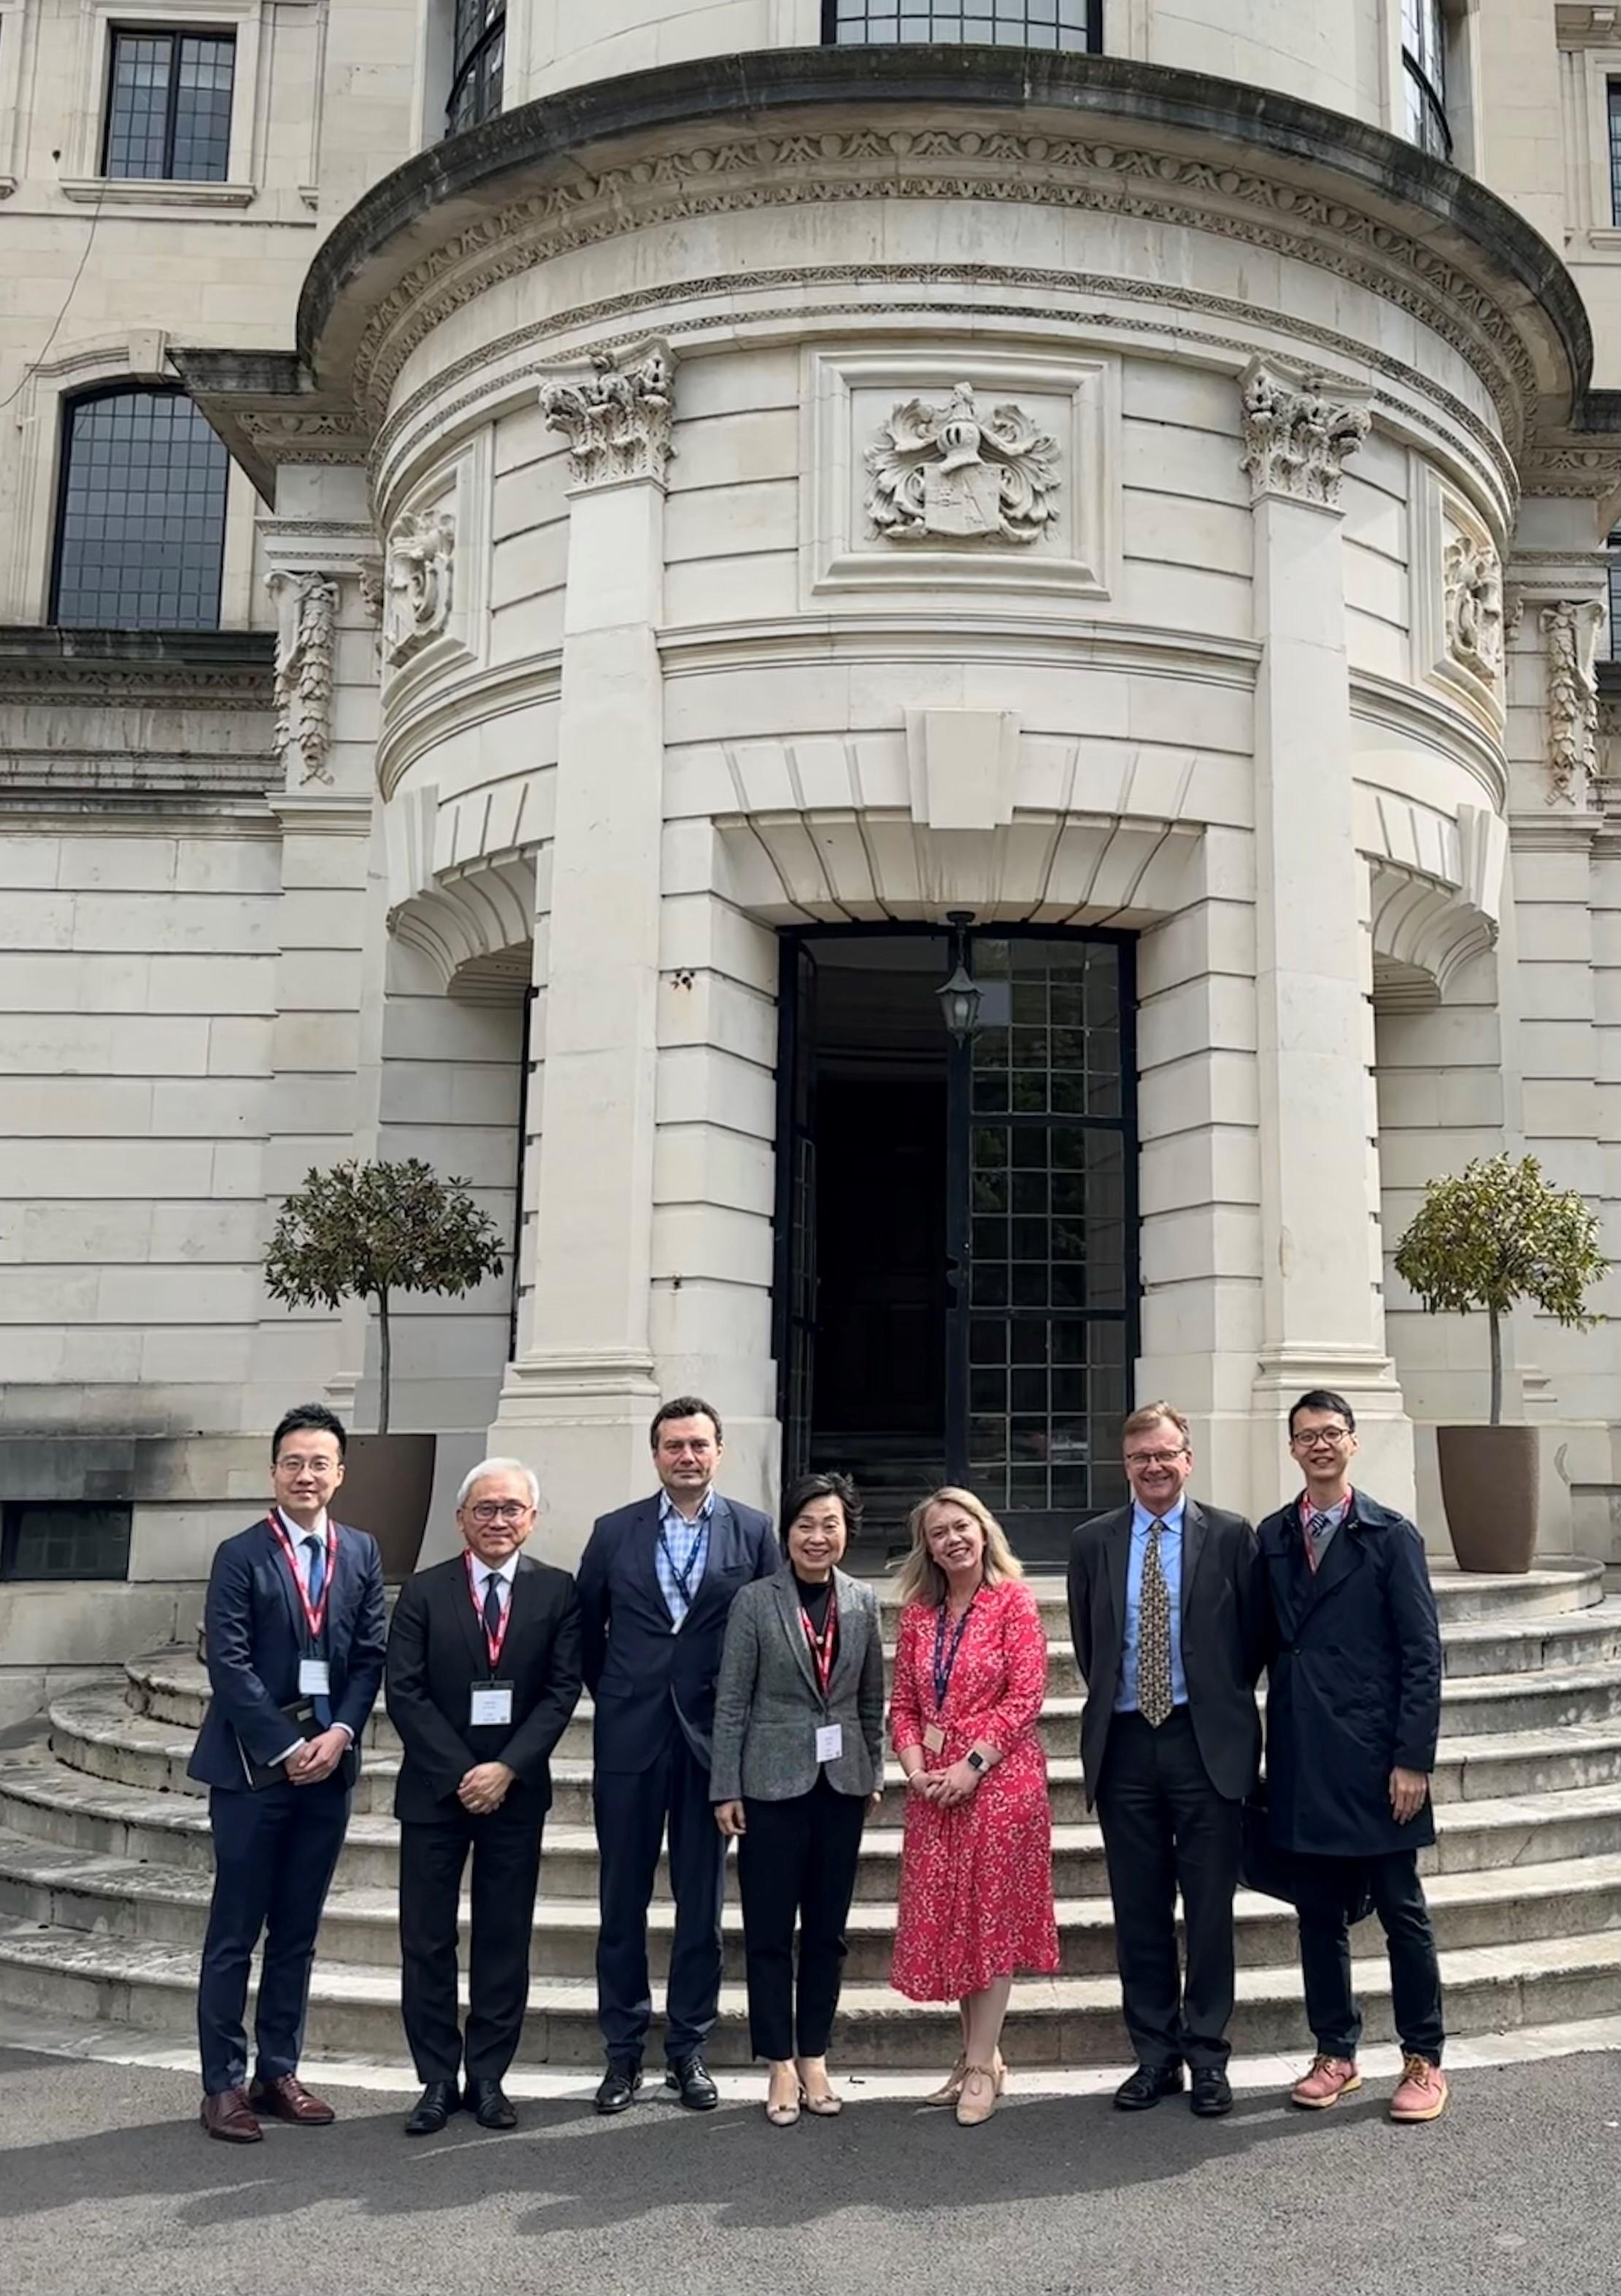 The Secretary for Education, Dr Choi Yuk-lin, continued her visit in London, the United Kingdom, on May 12 (London time). Photo shows Dr Choi (centre) meeting leaders of North London Collegiate School during her visit to the school.